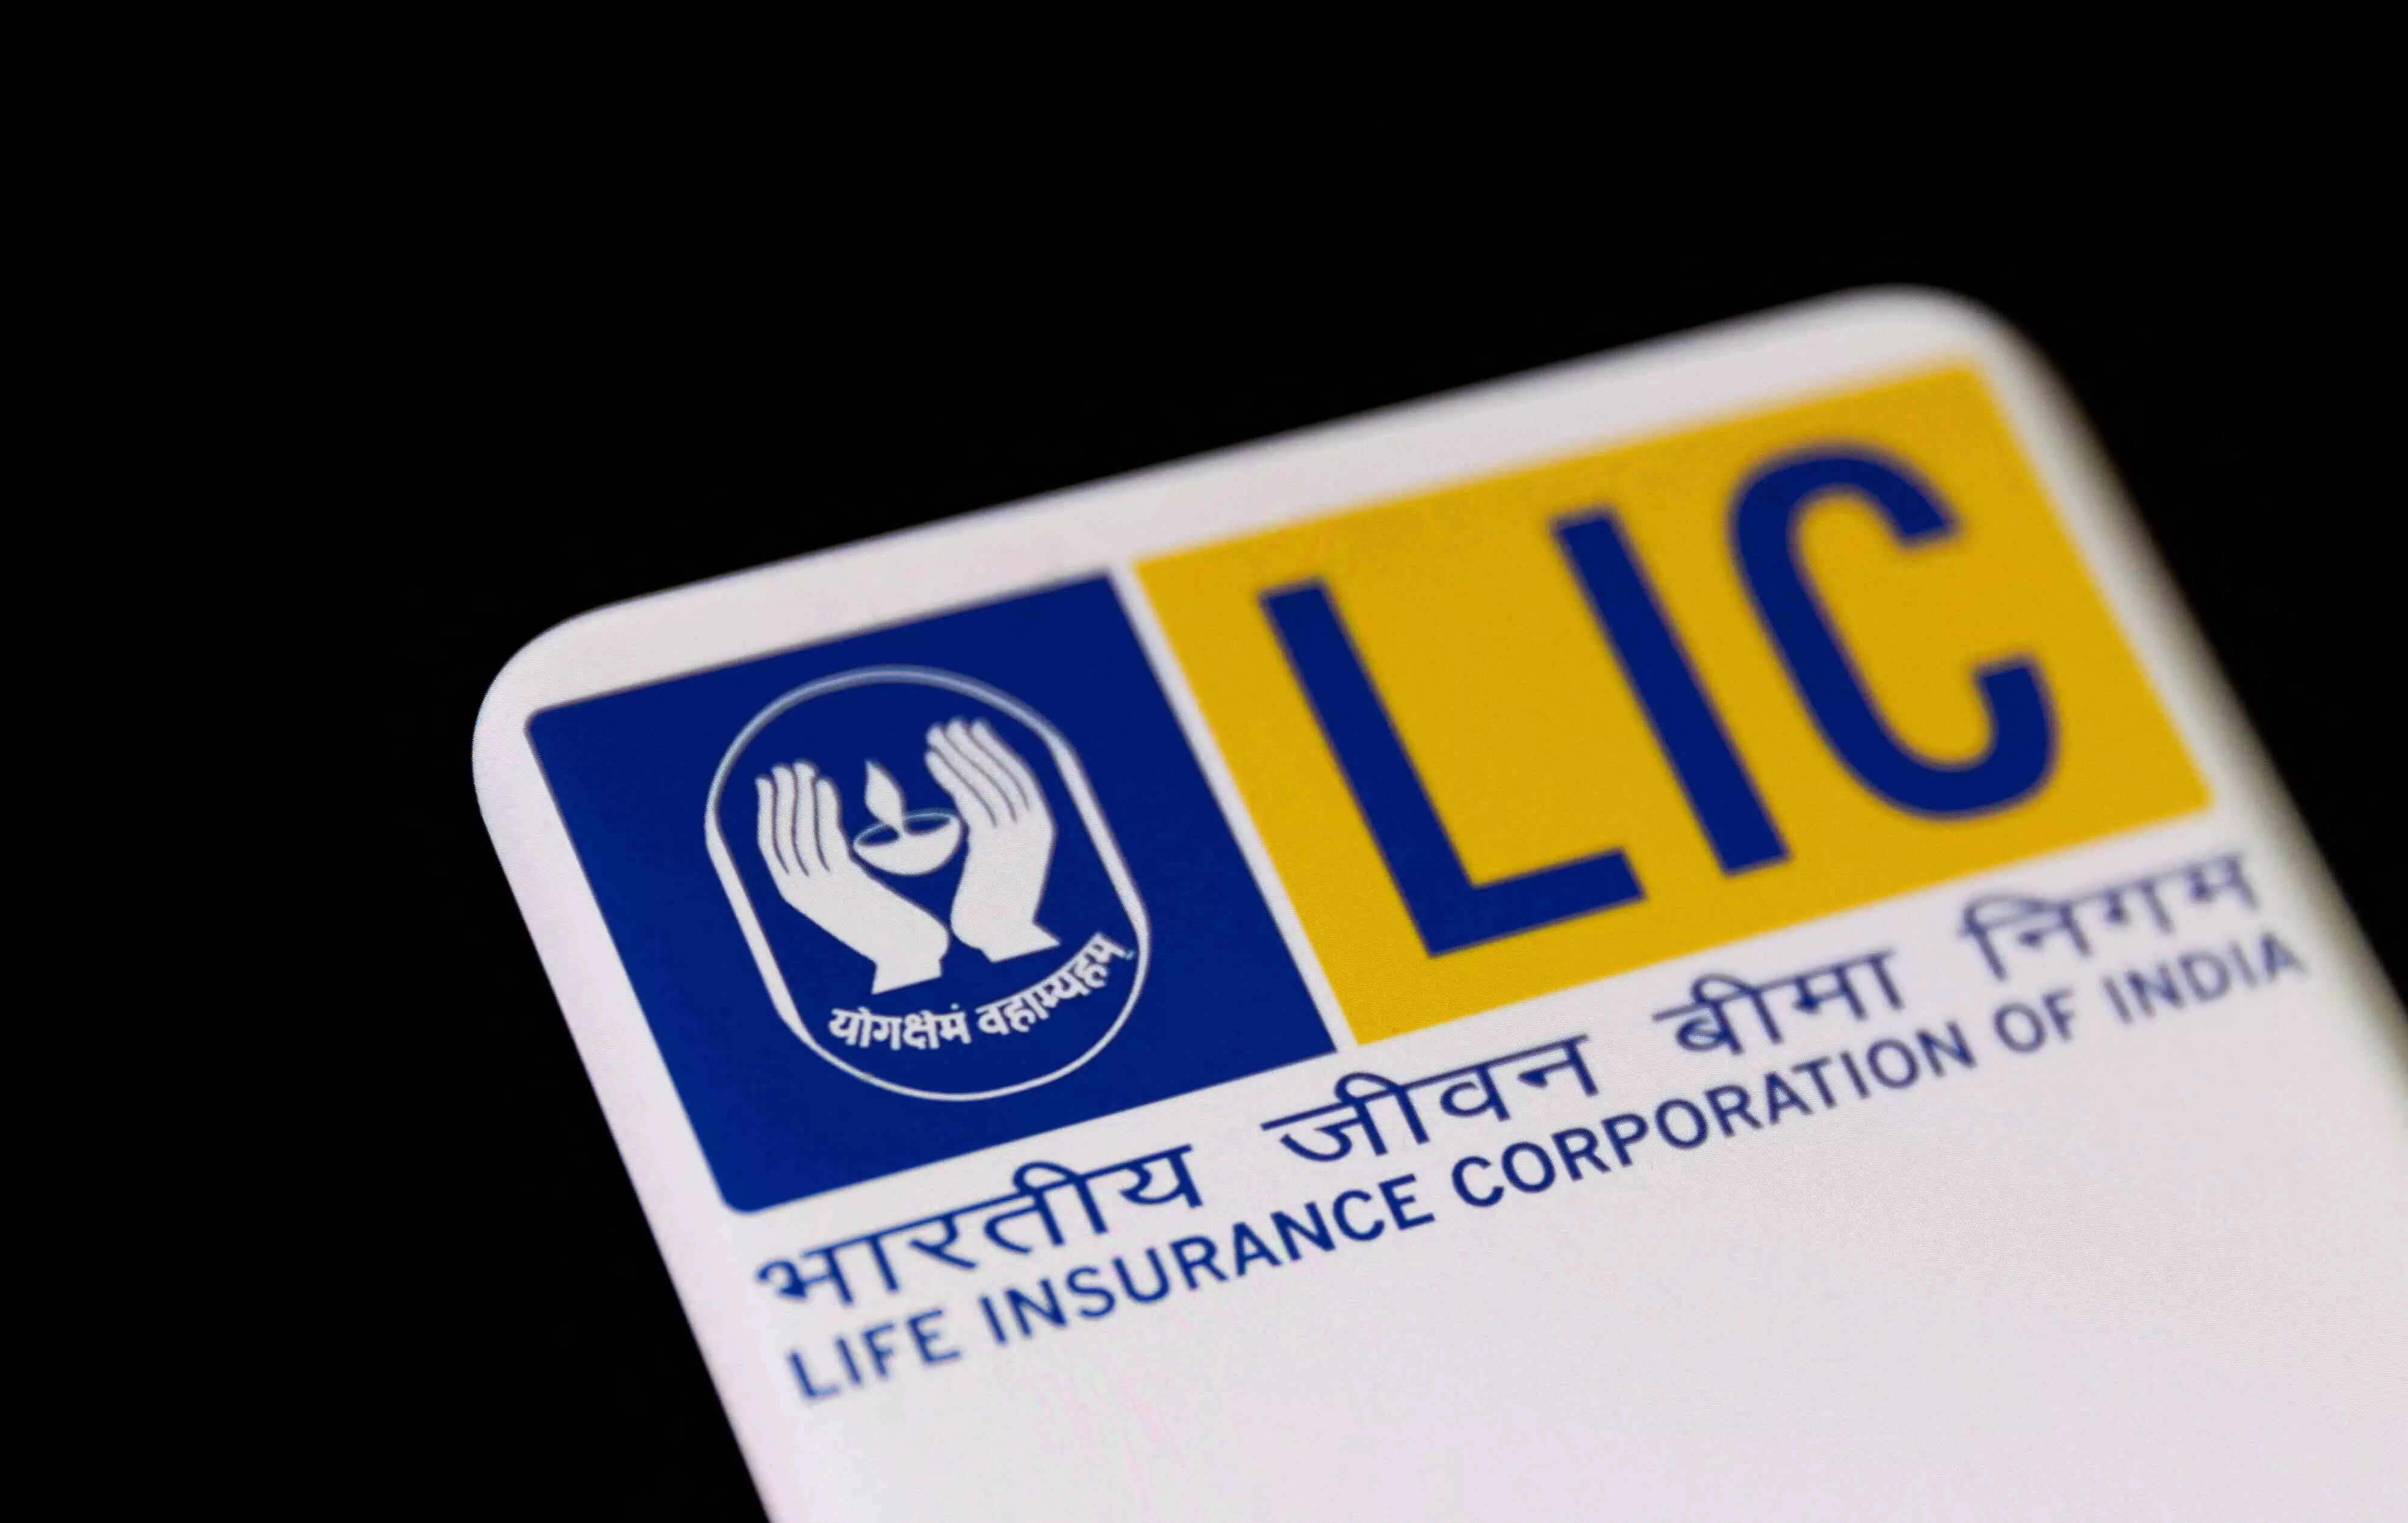 lic ipo investors disappointed share closes below issue price loss of 47000 crore rupees